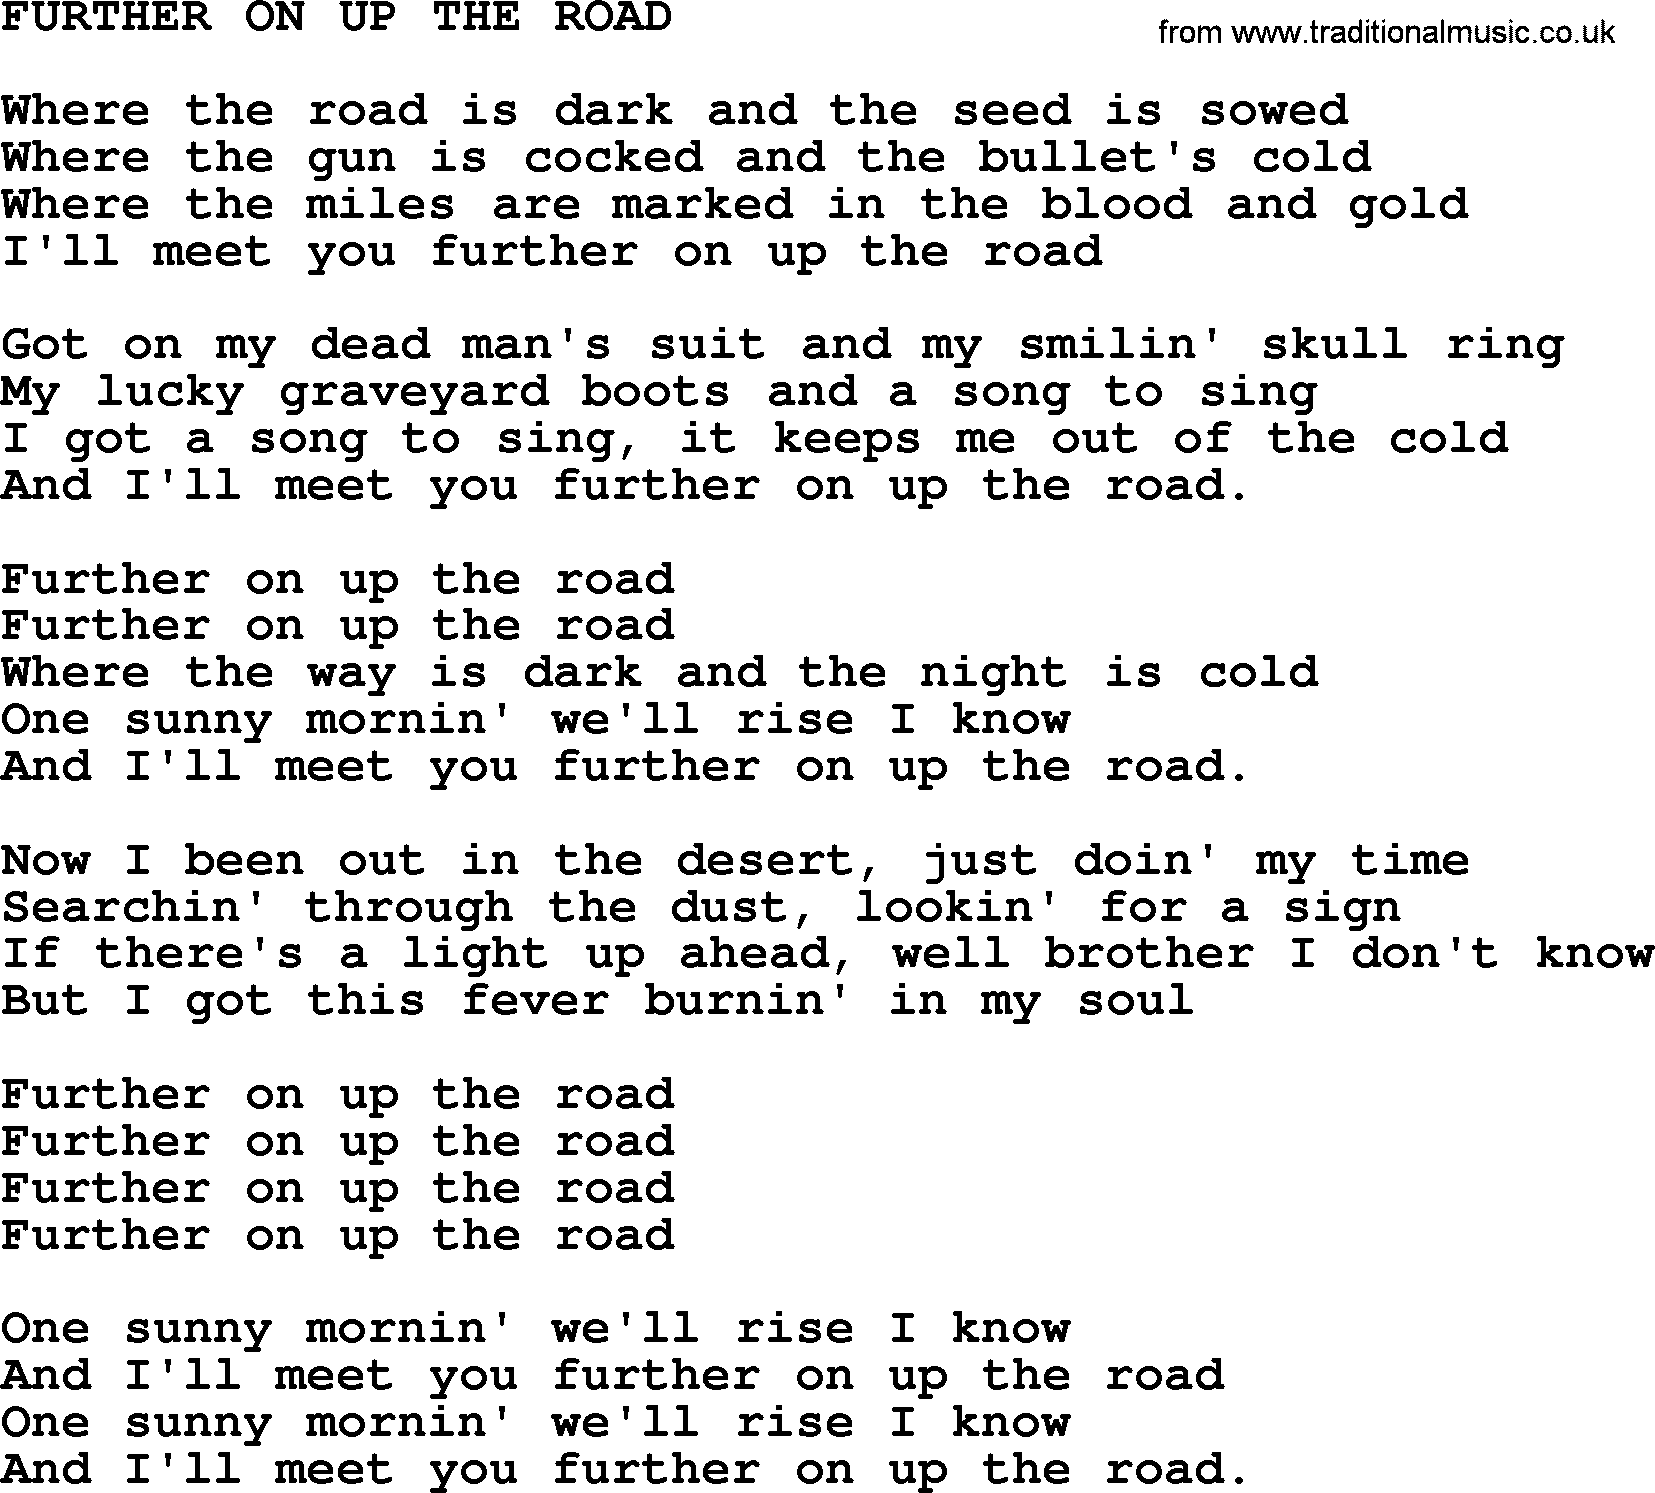 Johnny Cash song Further On Up The Road.txt lyrics